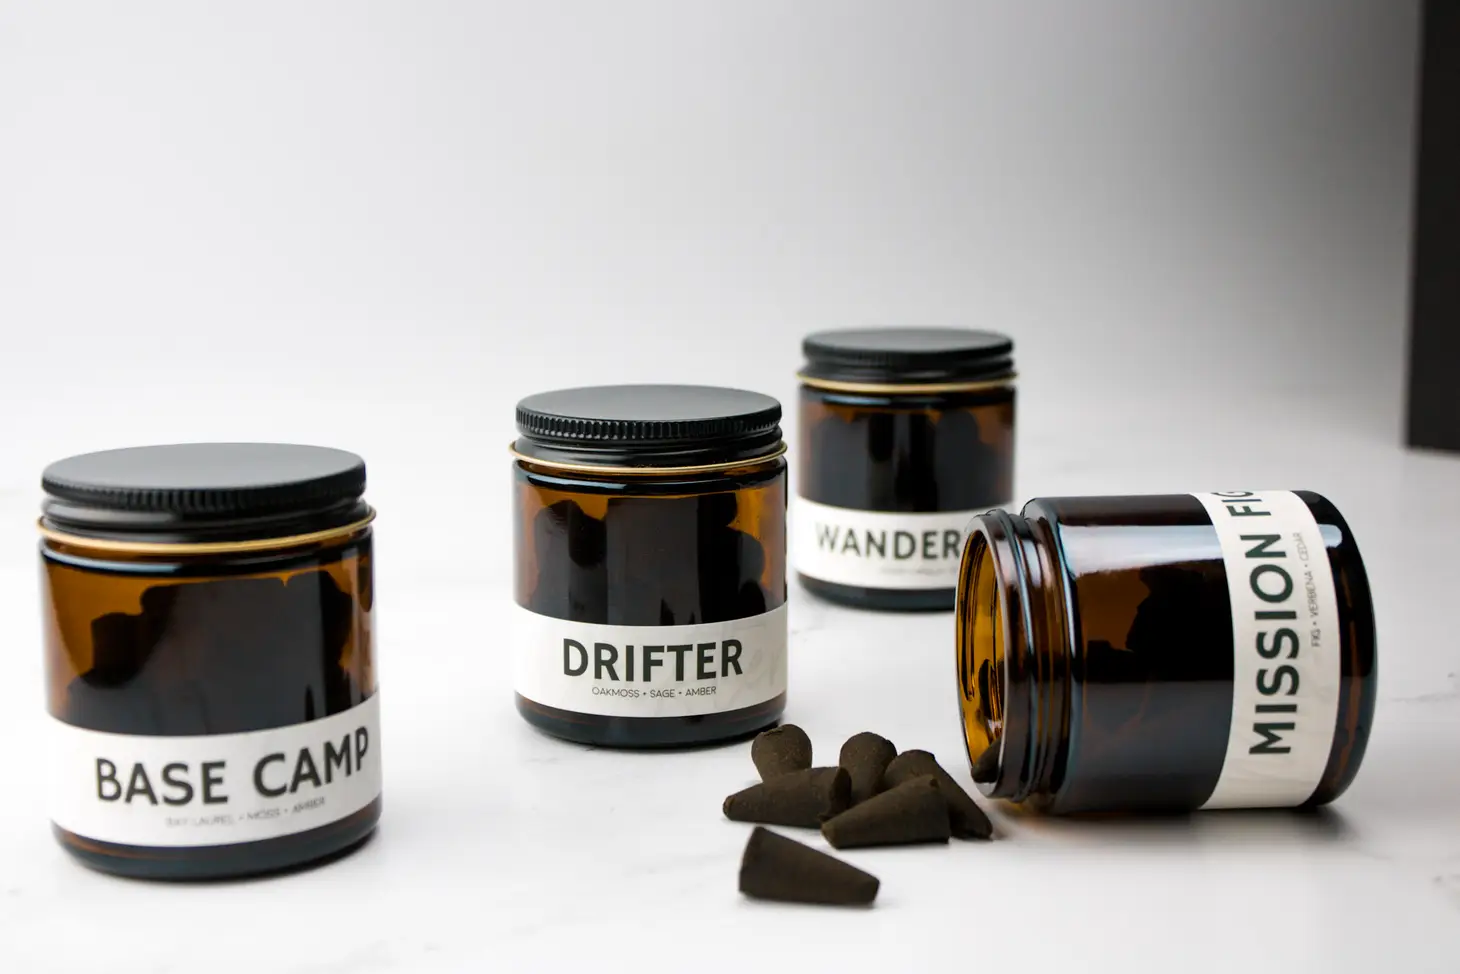 Drifter Incense Cones